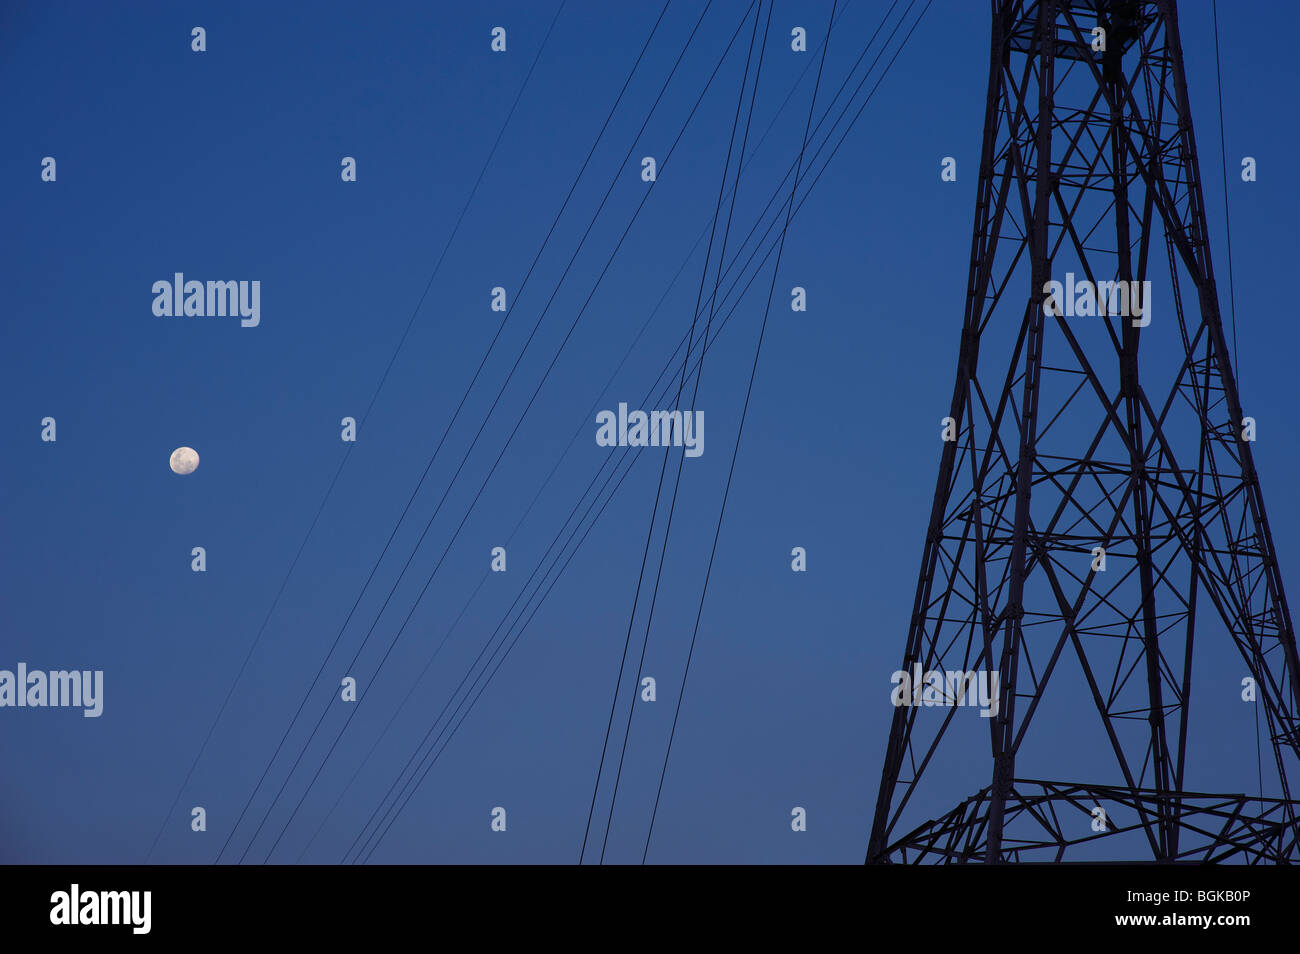 Electricity pylons and full moon Stock Photo